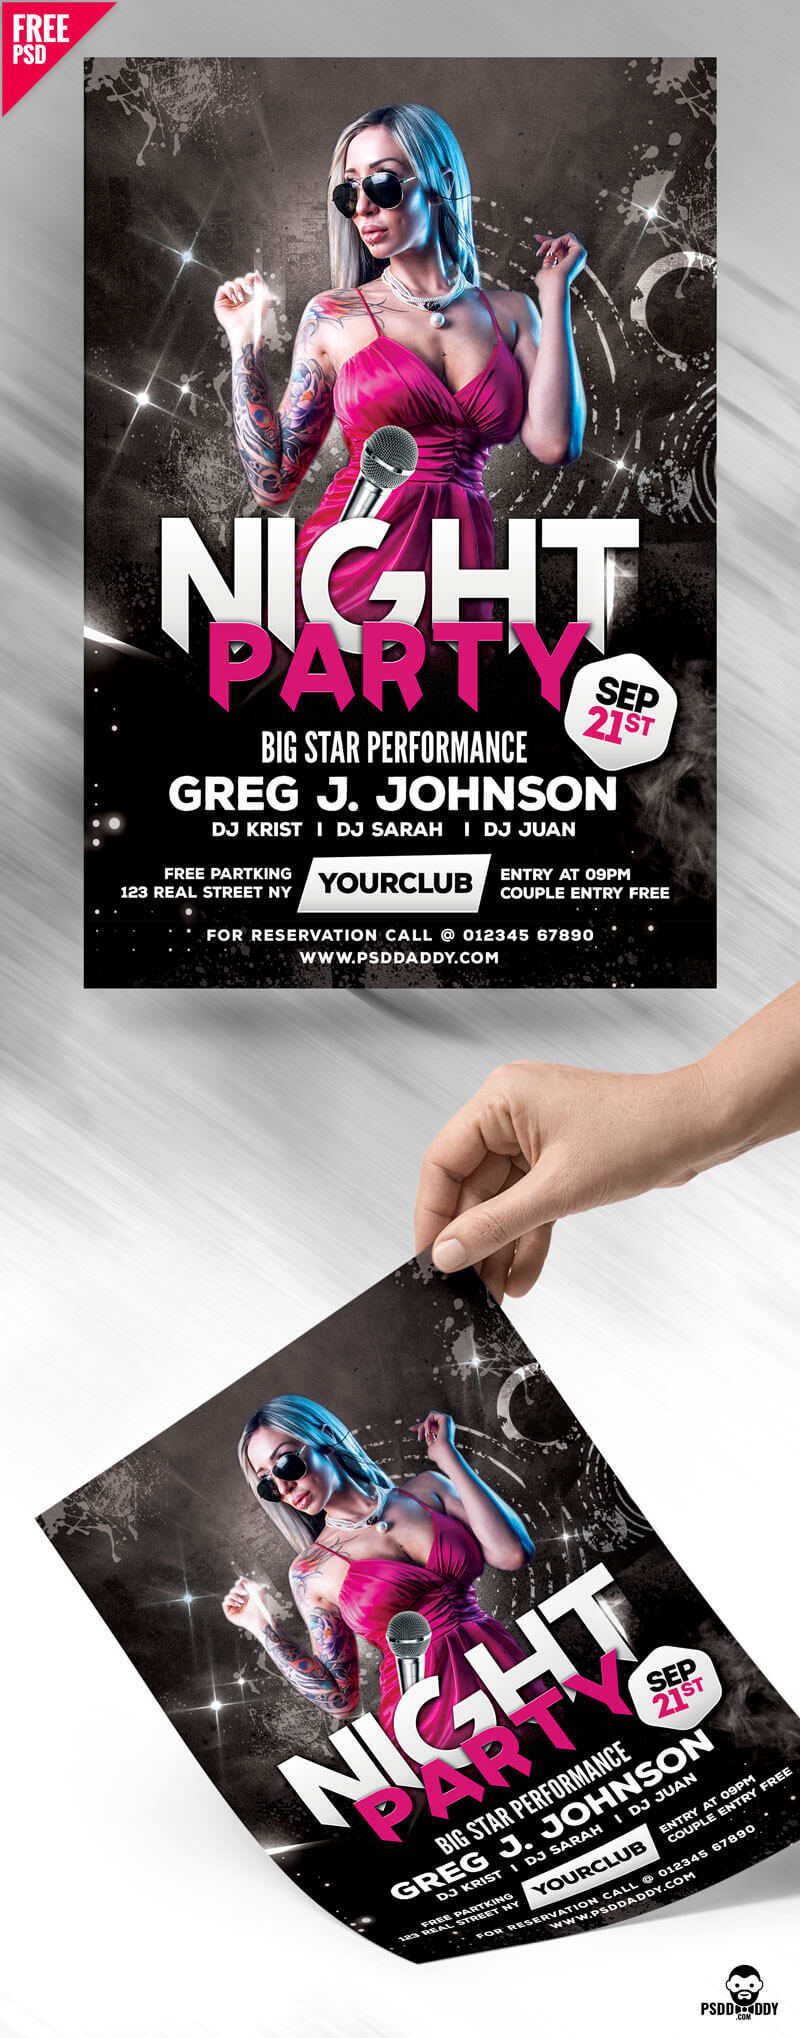 Download Download Night Party Flyer Design Free Psd Psddaddy Com PSD Mockup Templates